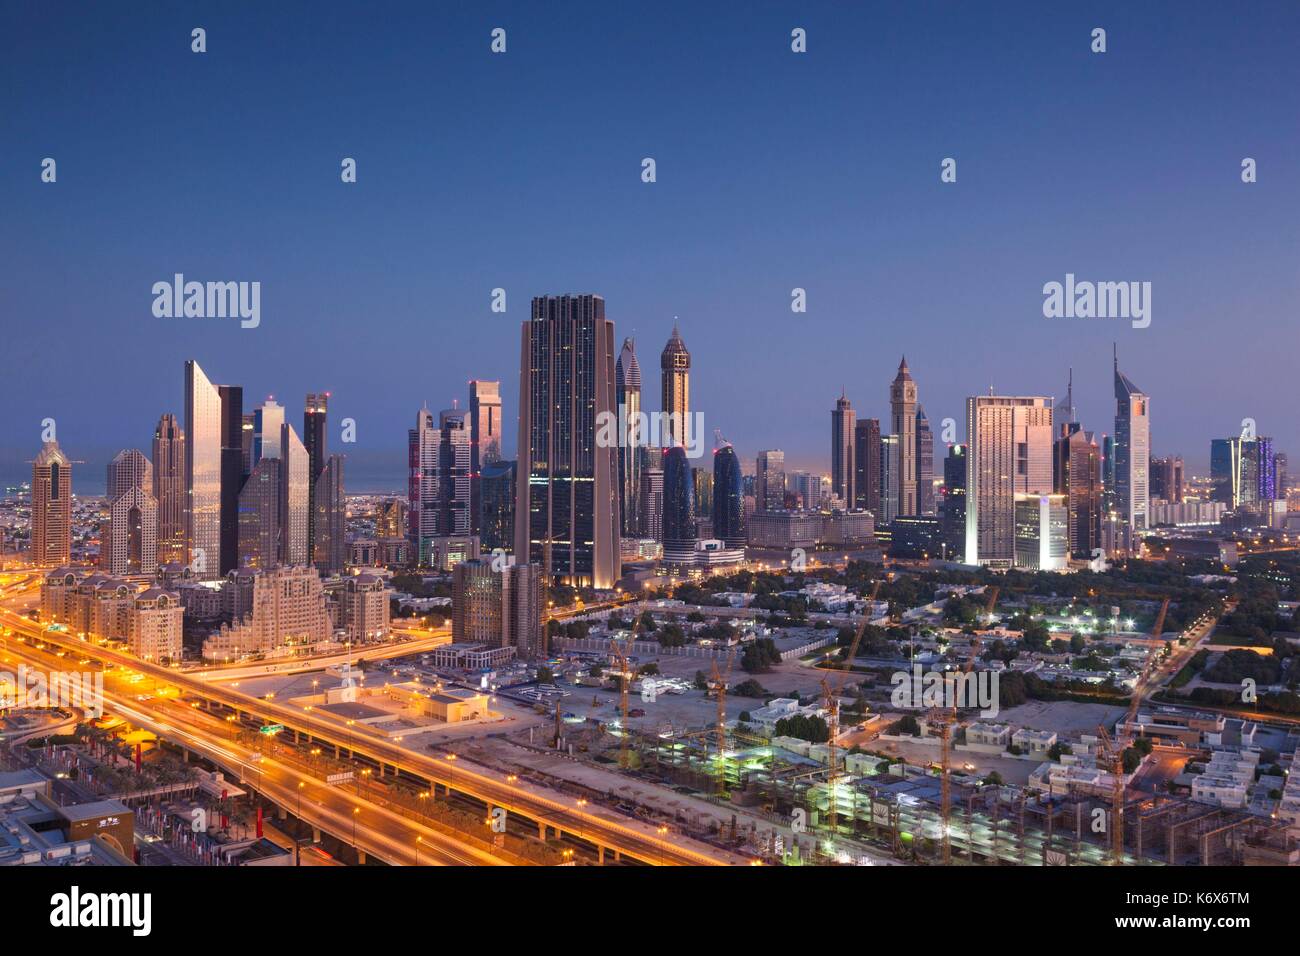 United Arab Emirates, Dubai, Downtown Dubai, elevated view of skyscrapers on Sheikh Zayed Road from downtown, dawn Stock Photo